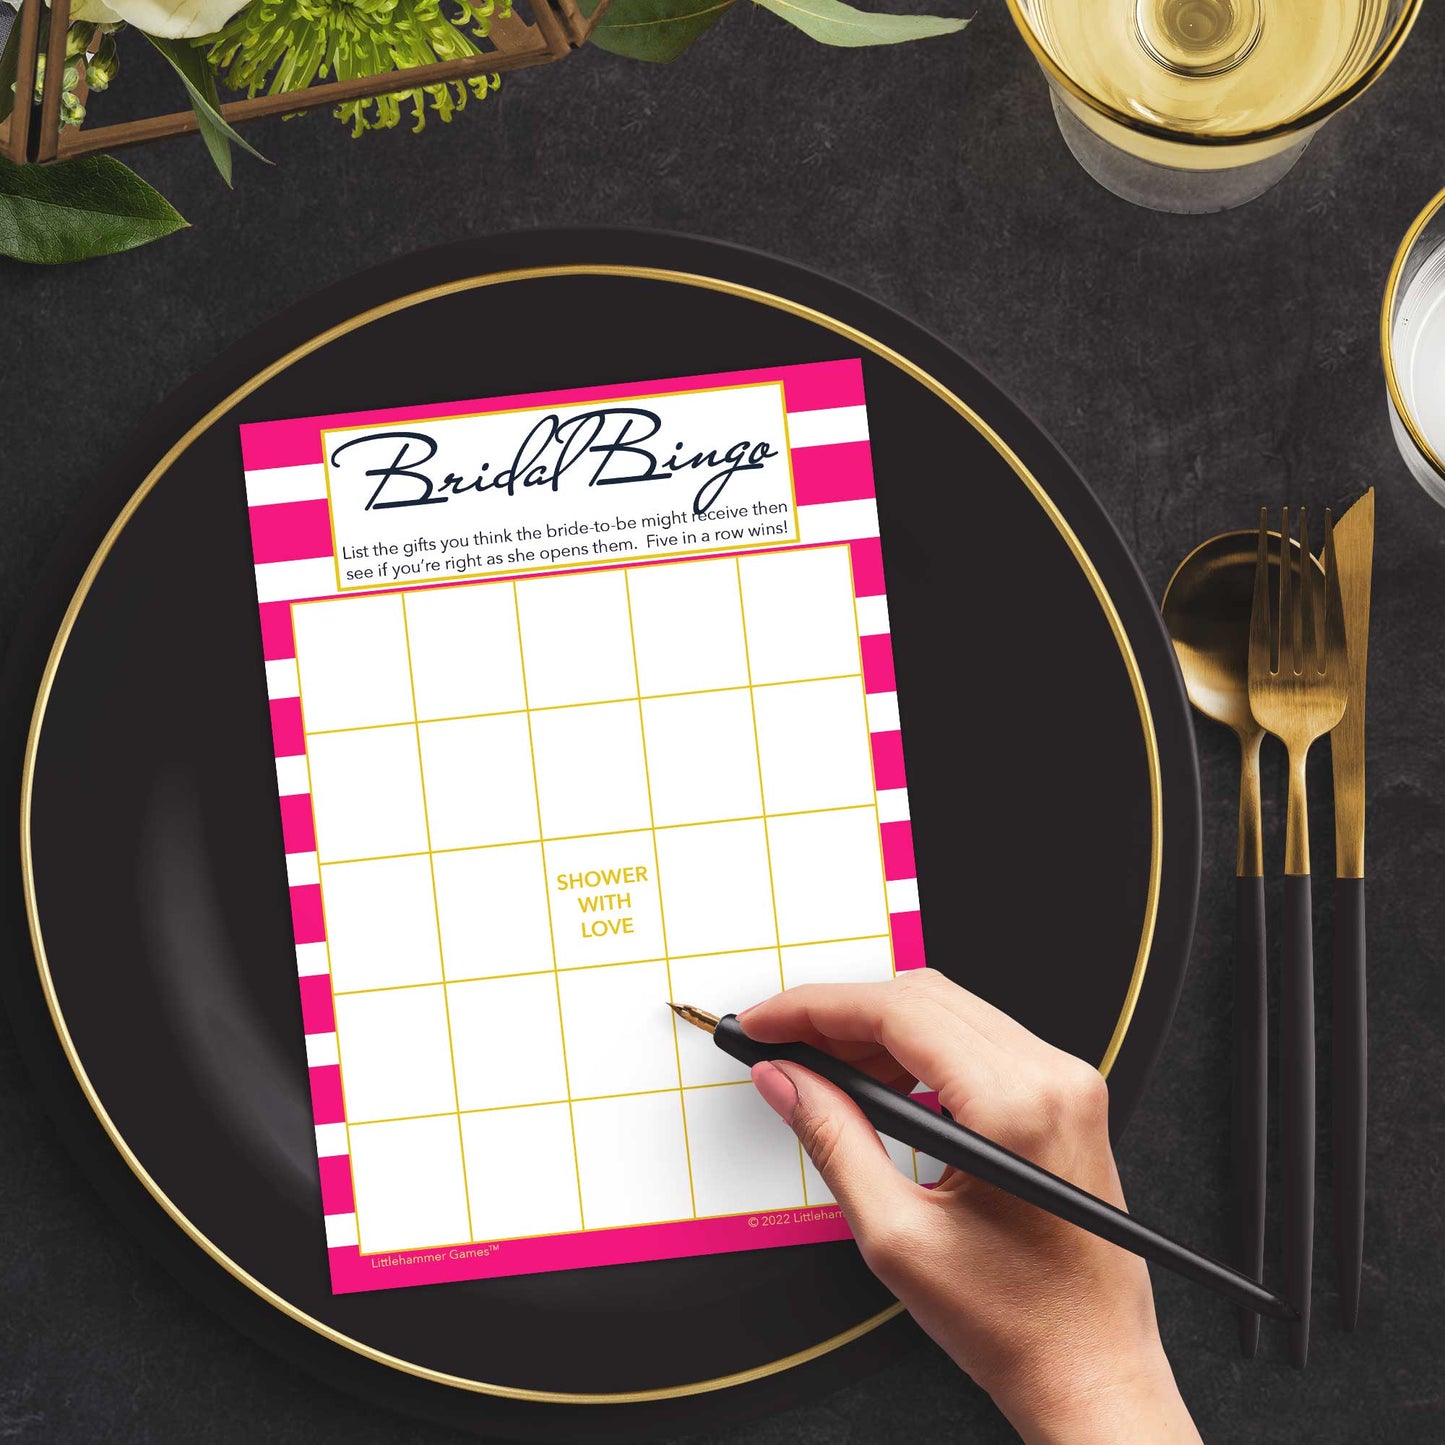 Woman with a pen sitting at a dark place setting with a black and gold plate filling out a hot pink-striped Bridal Gift Bingo card